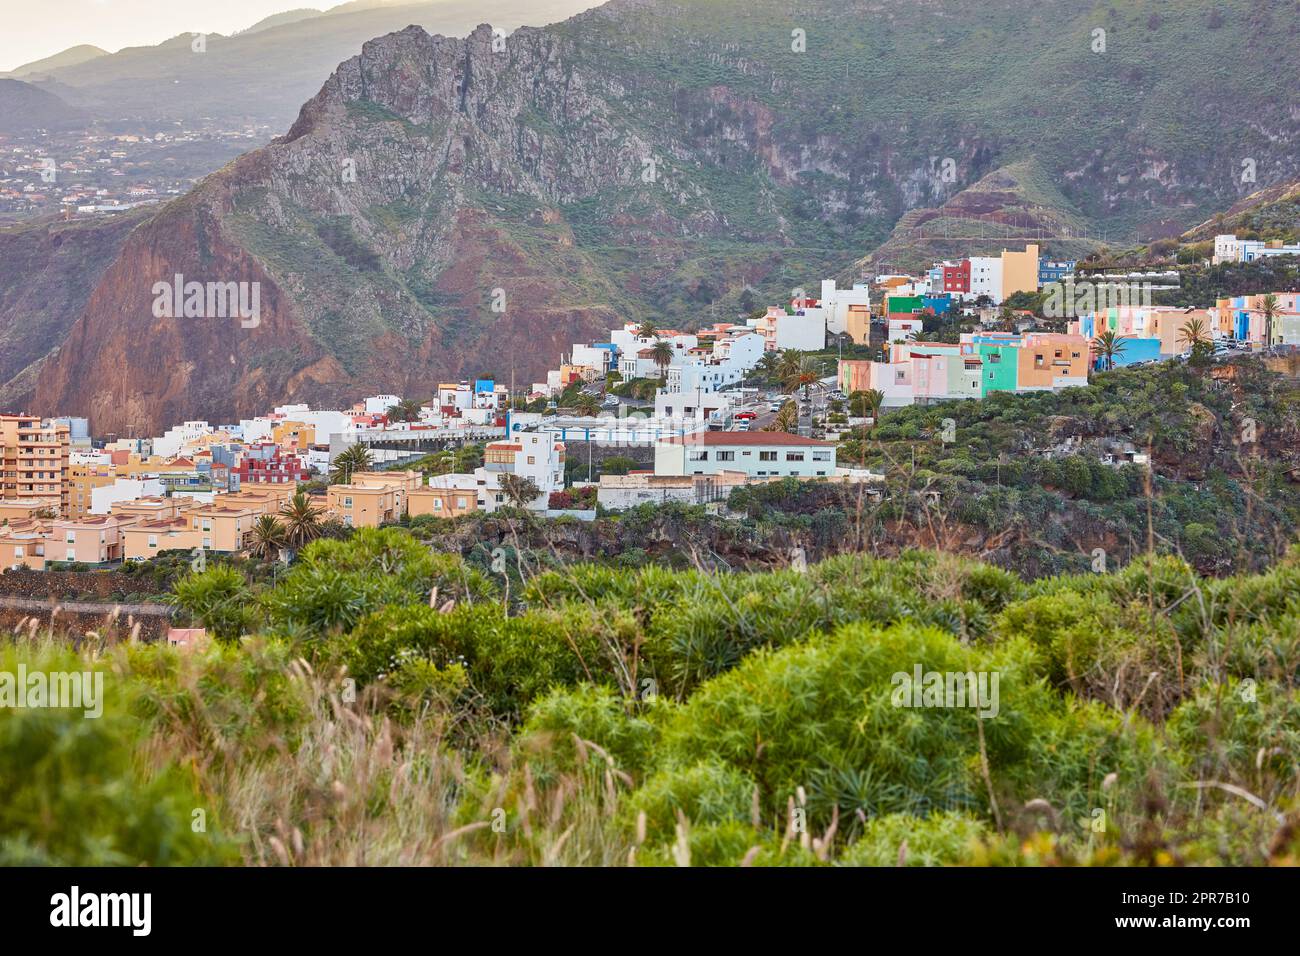 Colorful buildings in Santa Cruz, La Palma, Canary Islands with copy space. Beautiful cityscape with bright colors and mountains. A vibrant holiday, vacation and getaway destination on the hillside Stock Photo